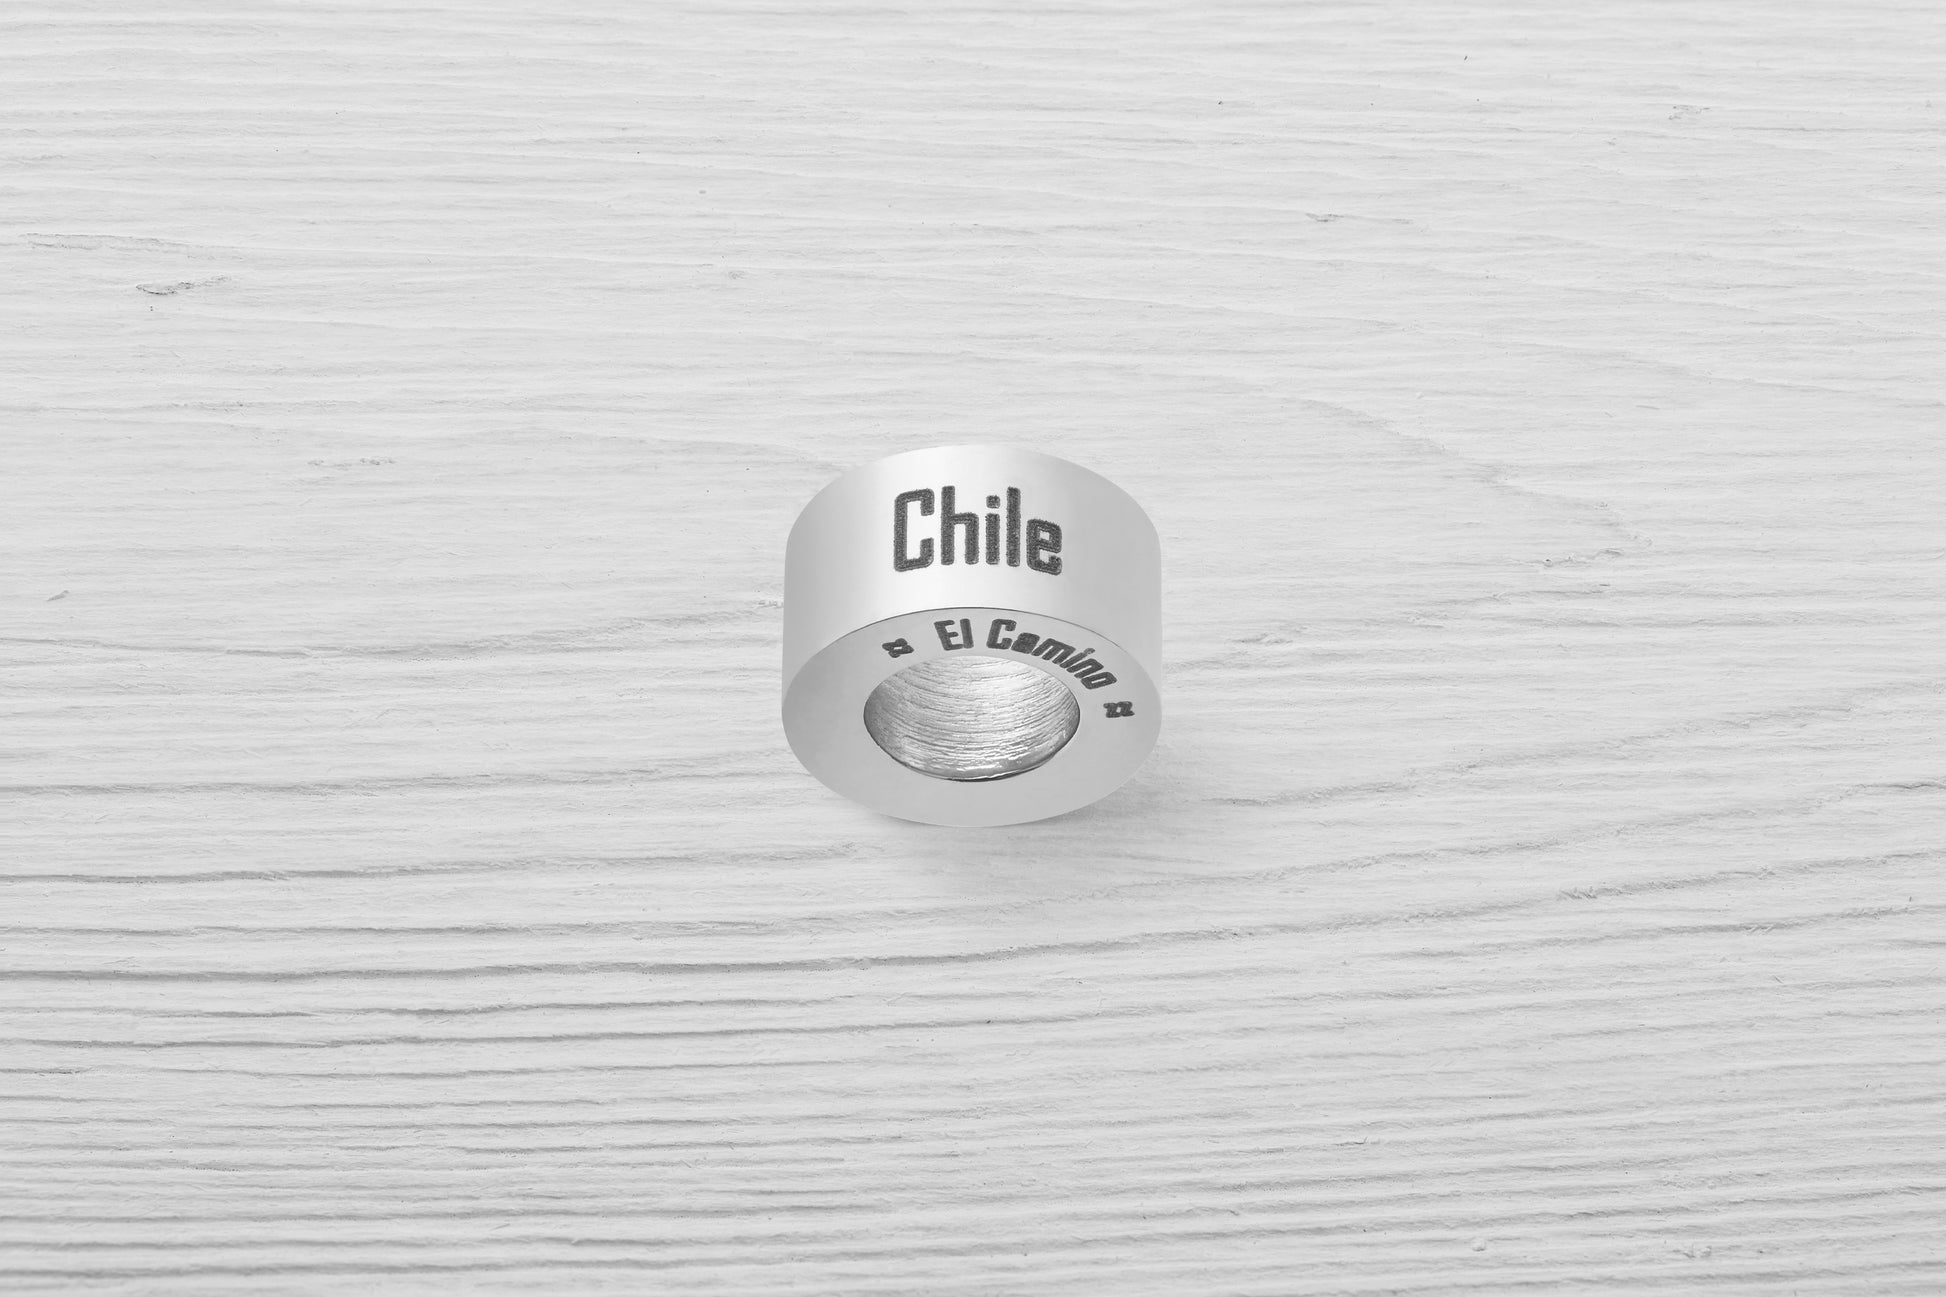 El Camino Chile Country Step Travel Charm Bead